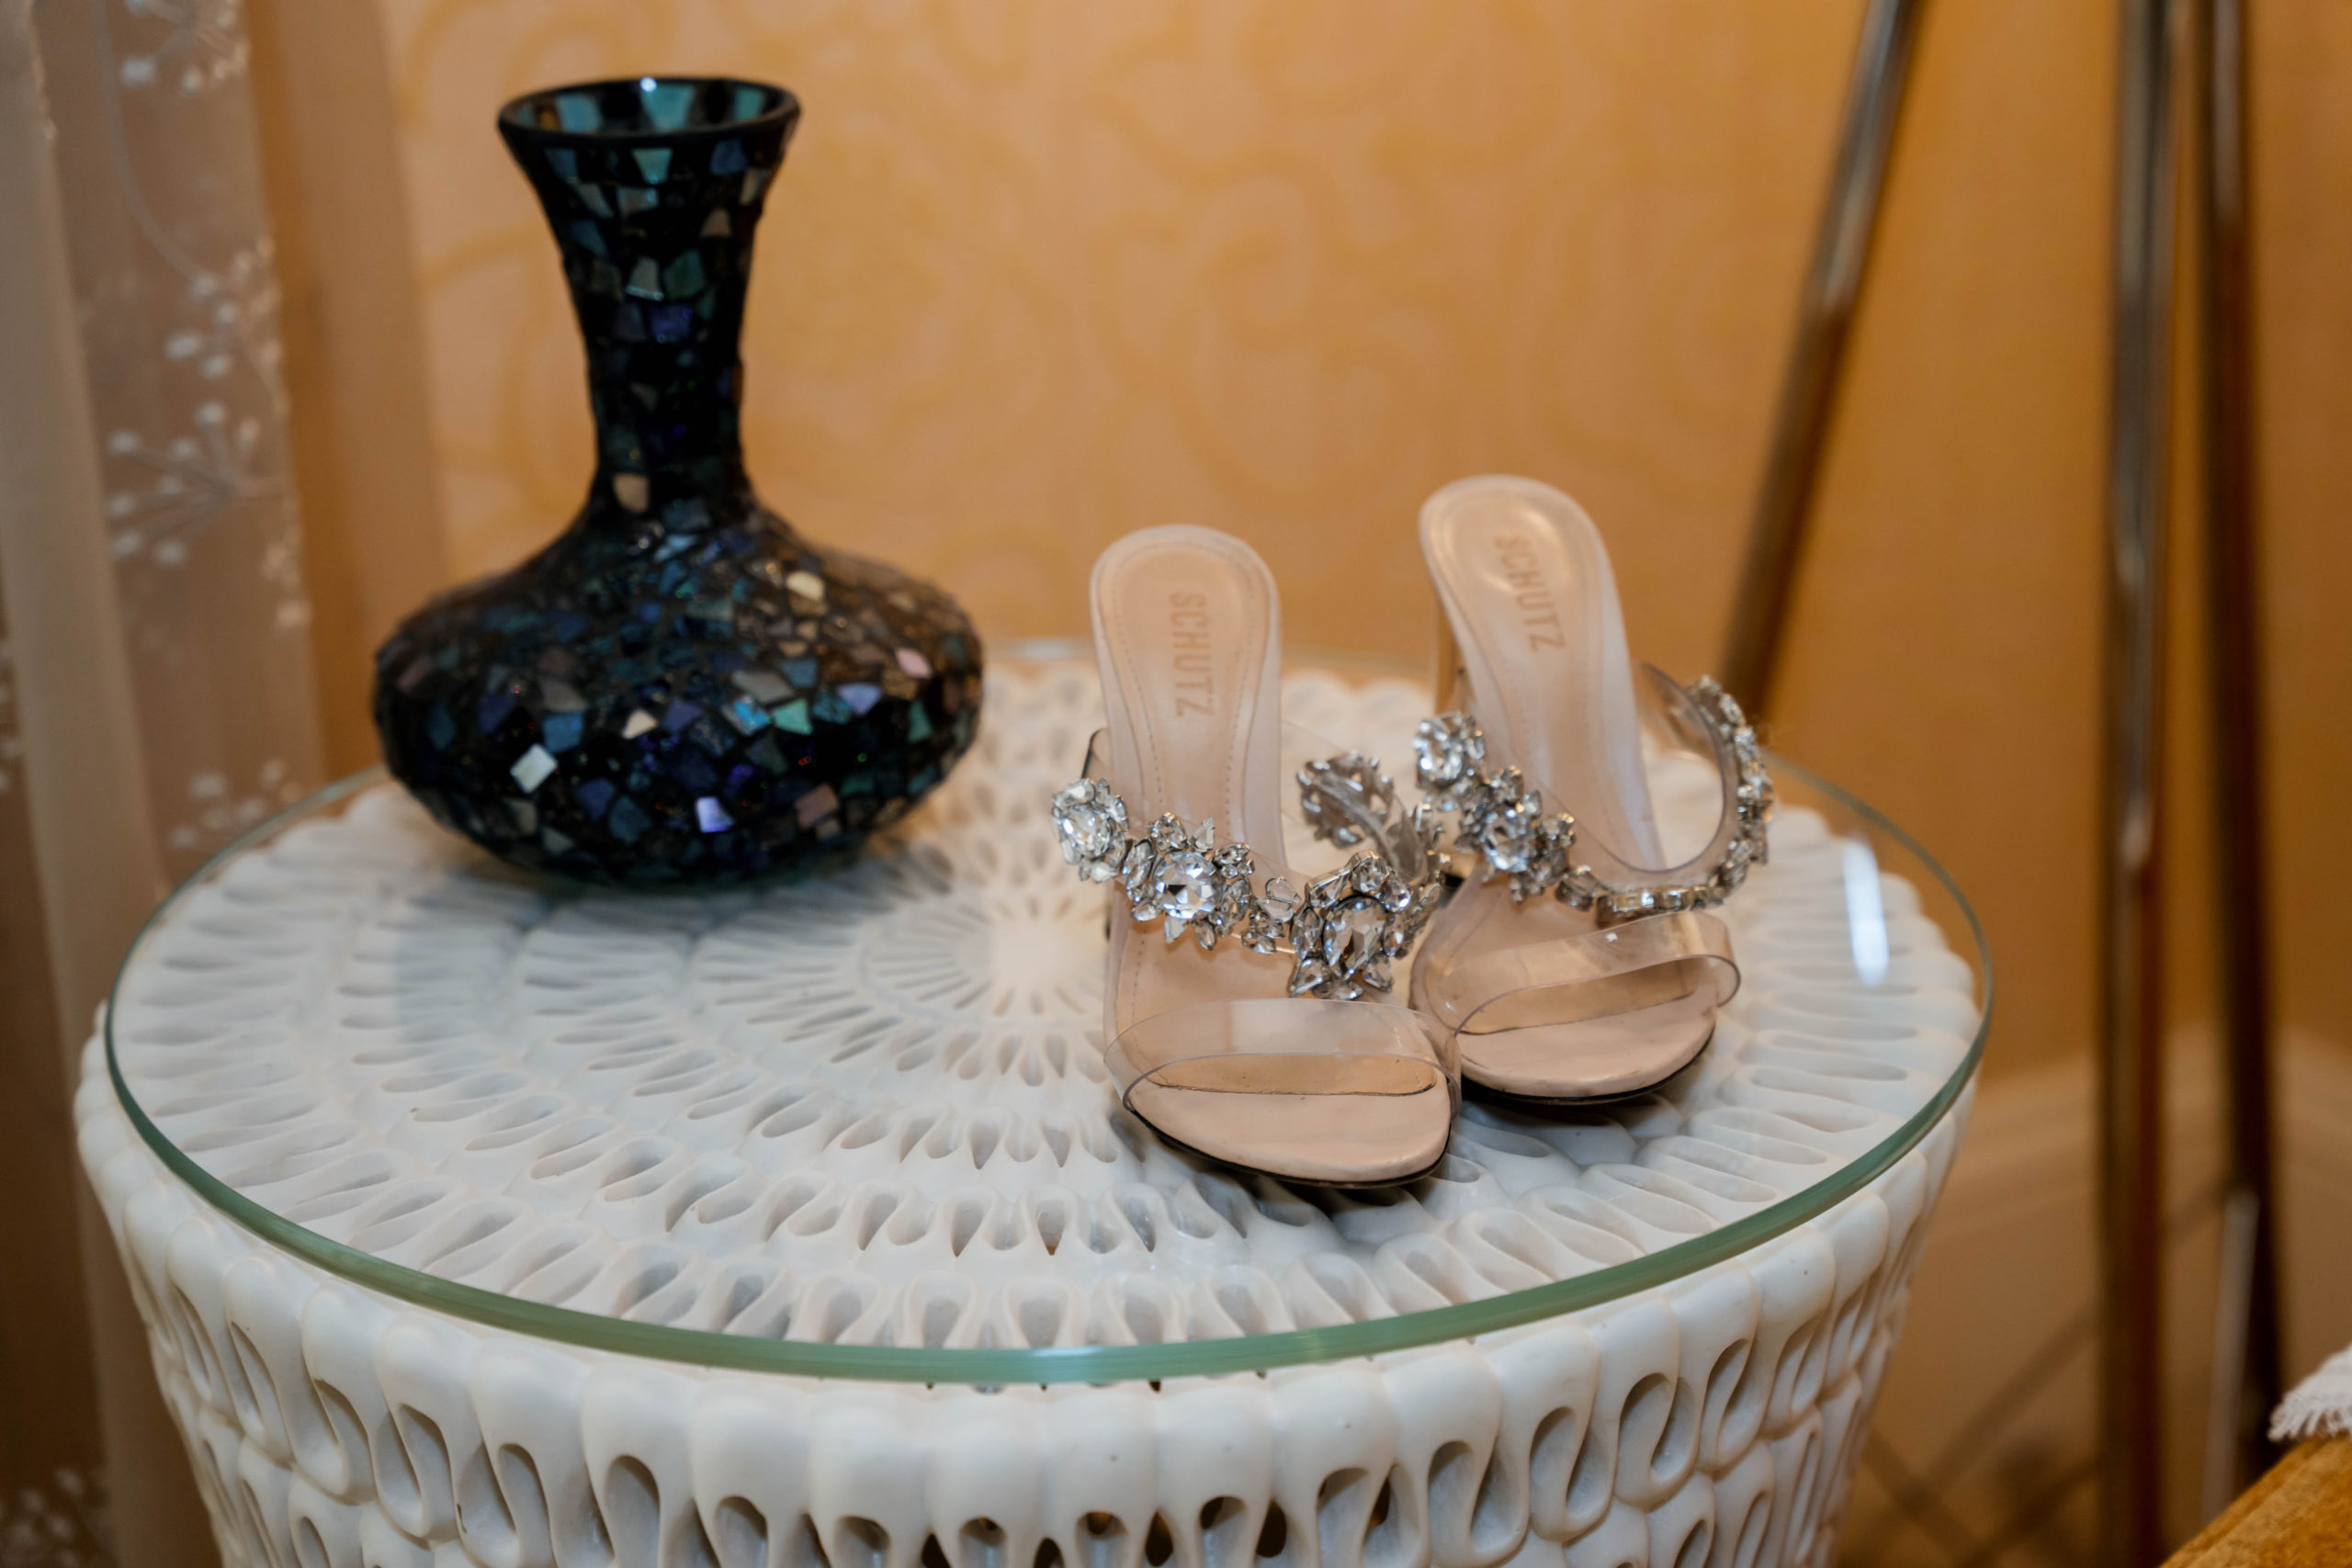 shoes and vase on endtable